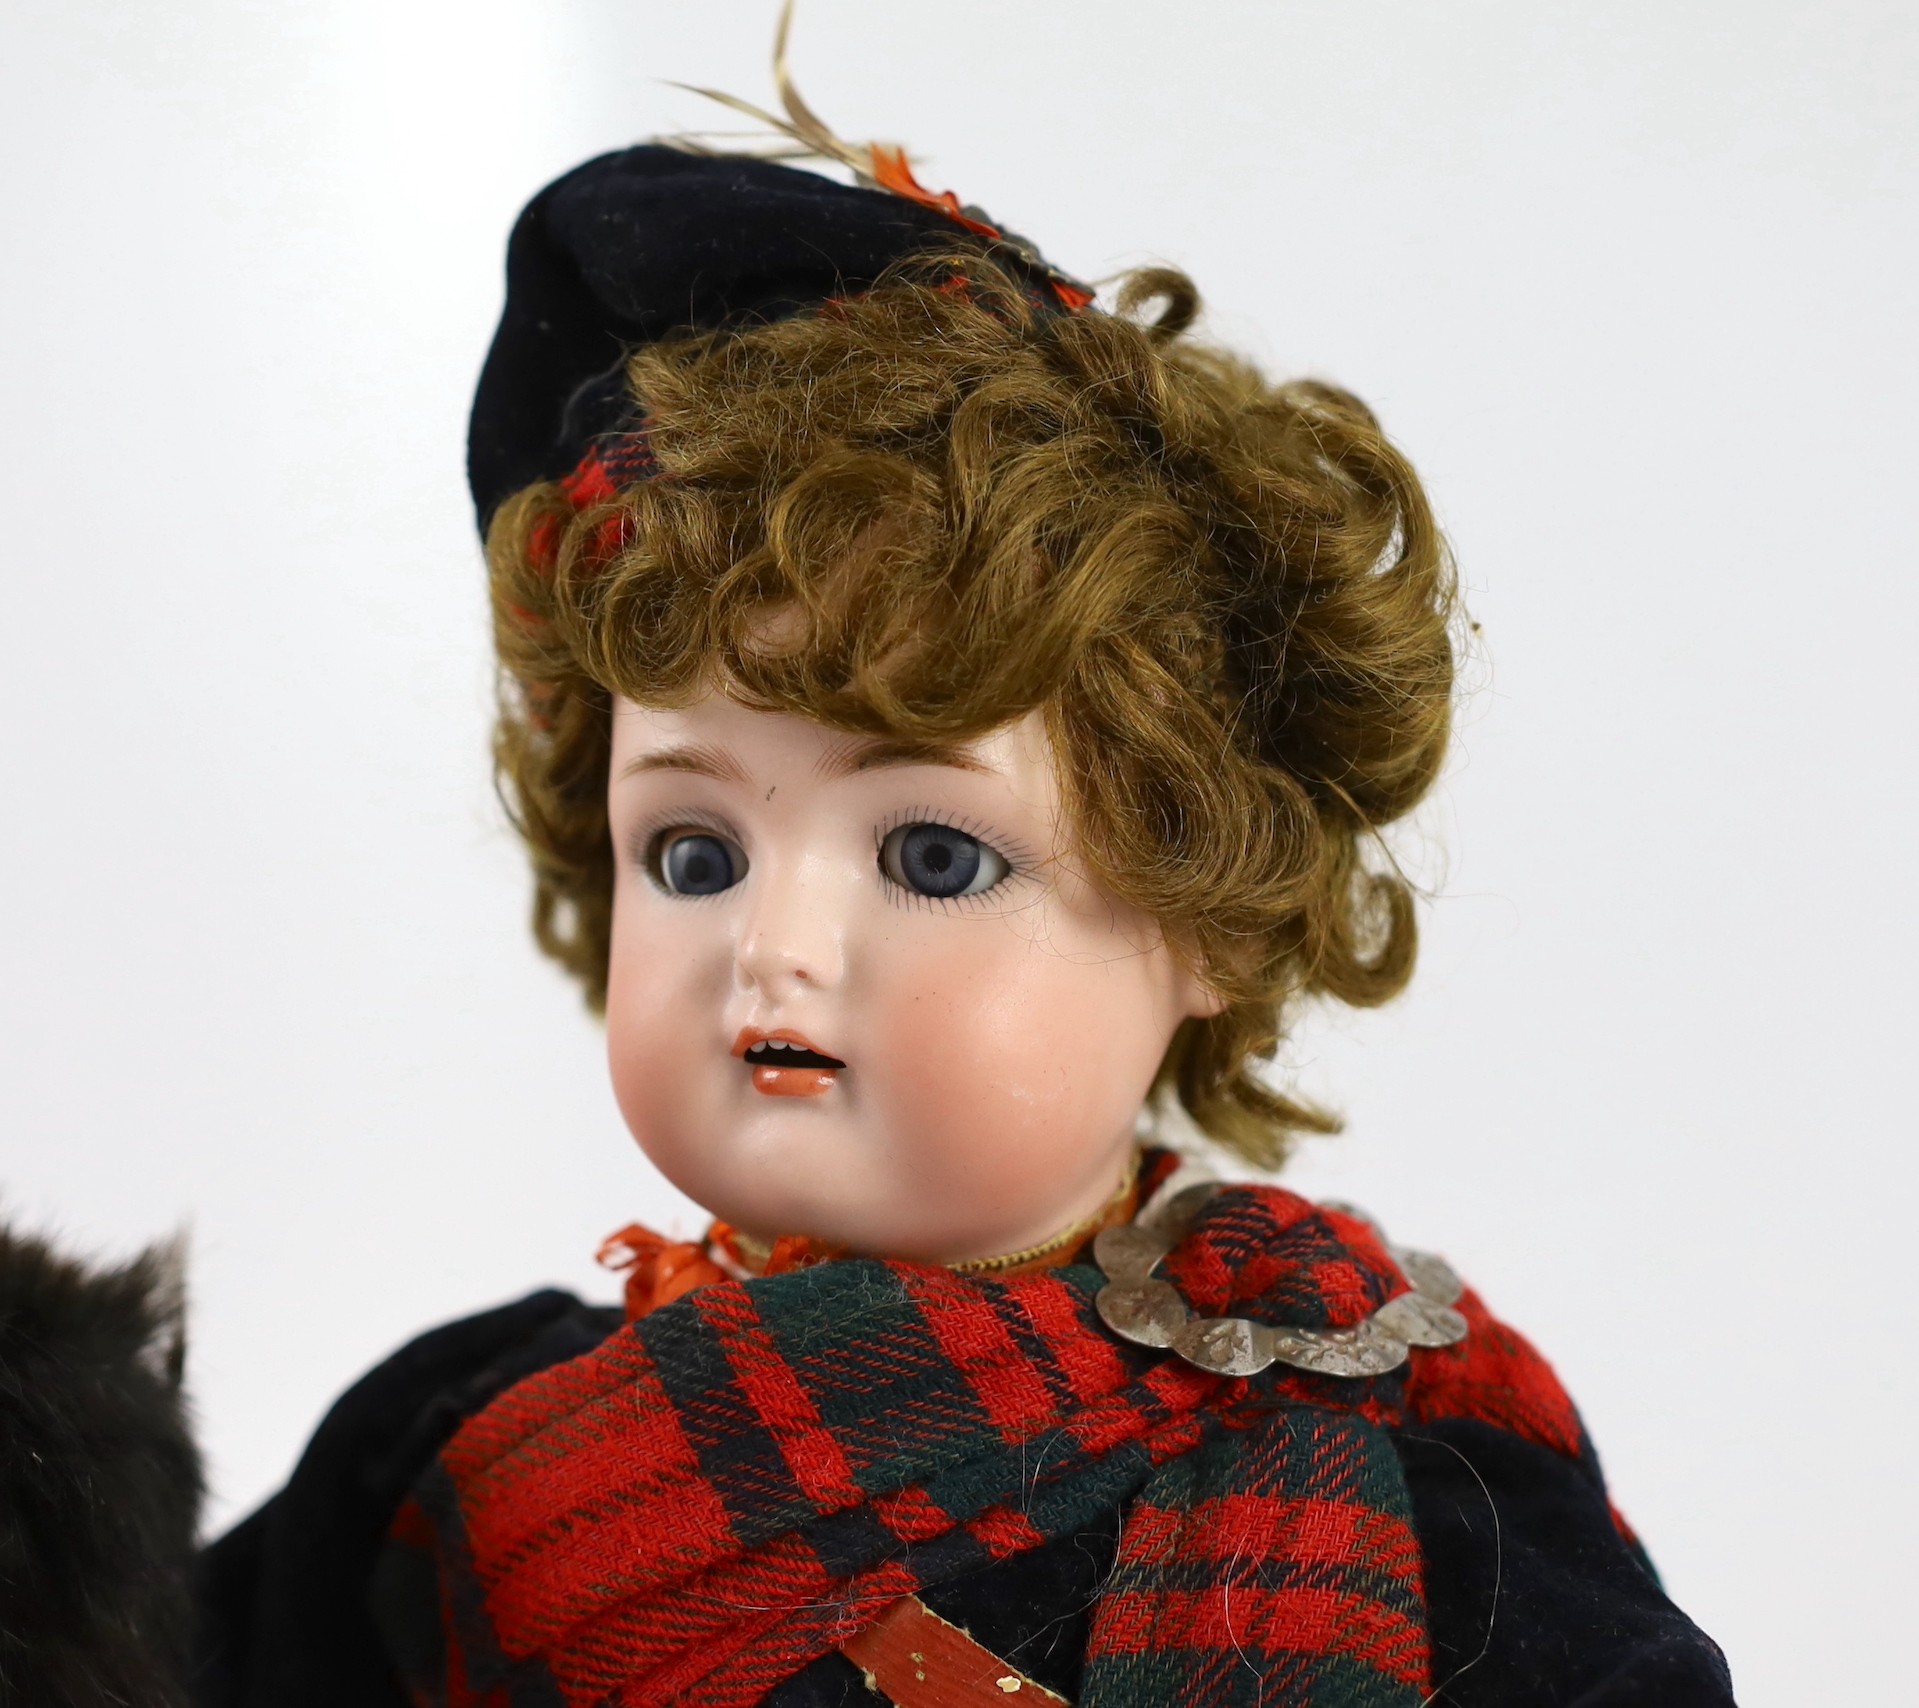 An Armand Marseille bisque Scottish soldier doll, German, circa 1900, impressed 390 A 6/0 M, with - Image 4 of 4